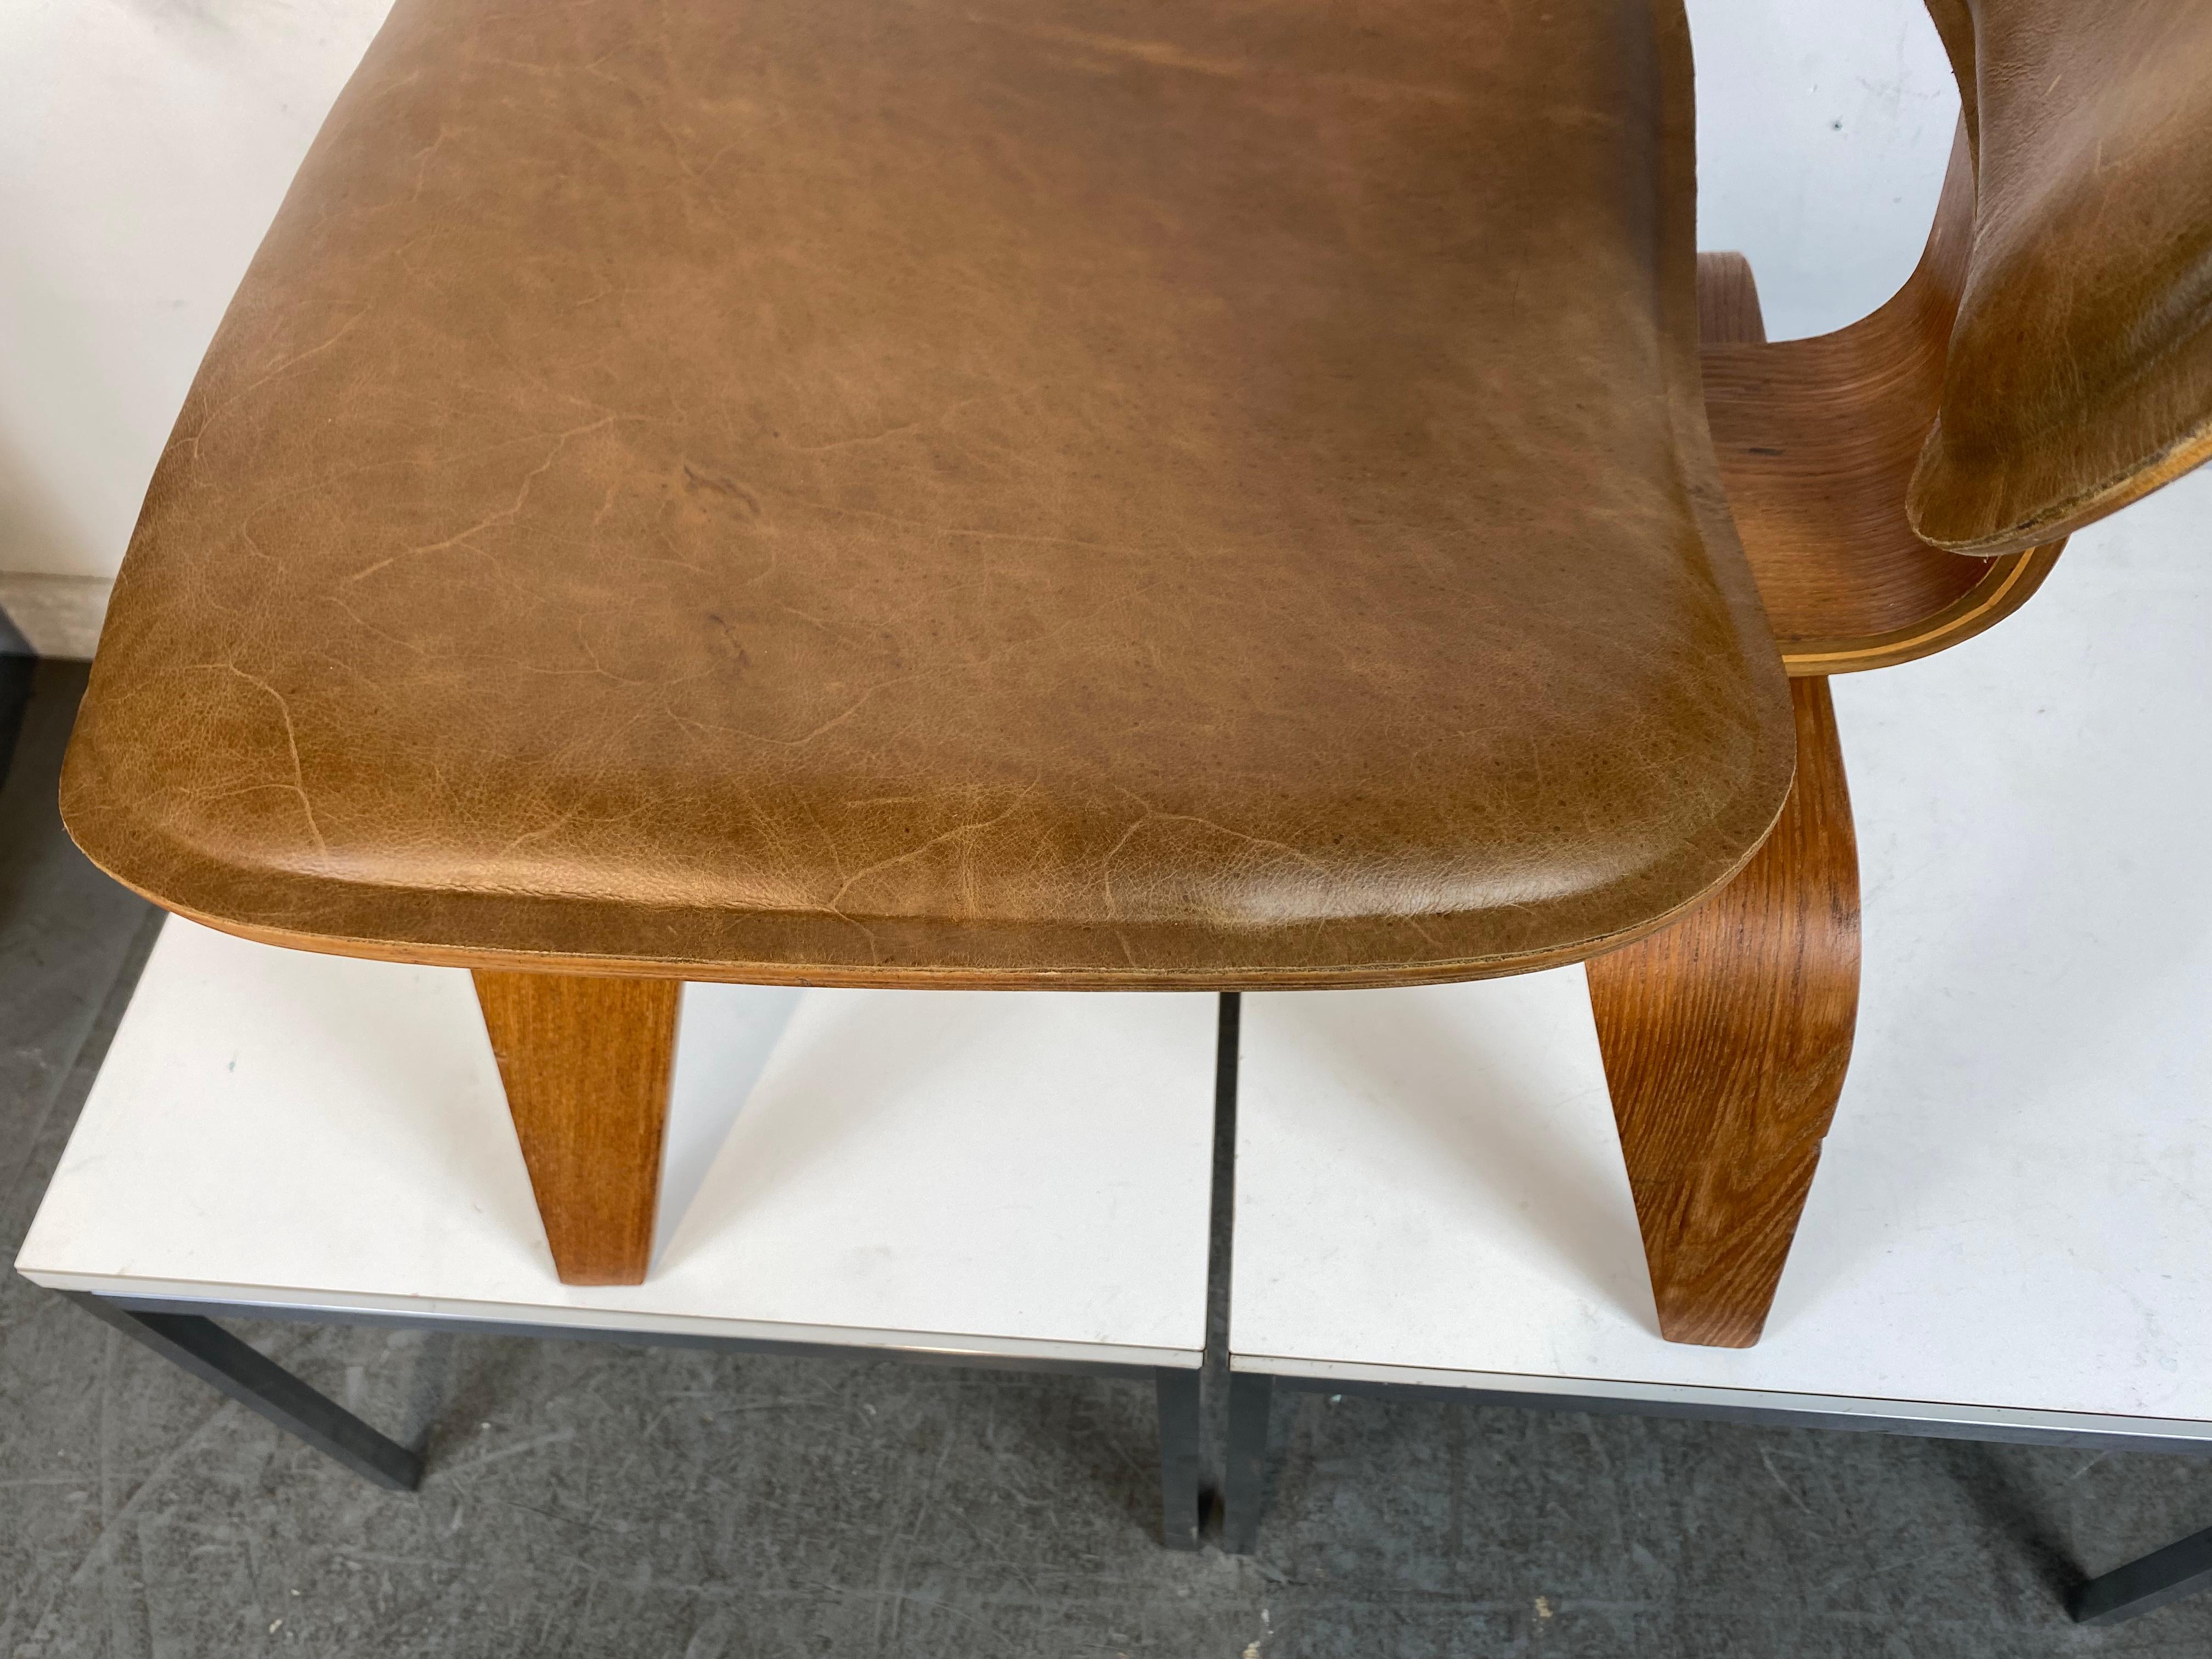 Charles Eames L C W (LOUNGE CHAIR) Leather seat and back, Modernist Herman Miller 2